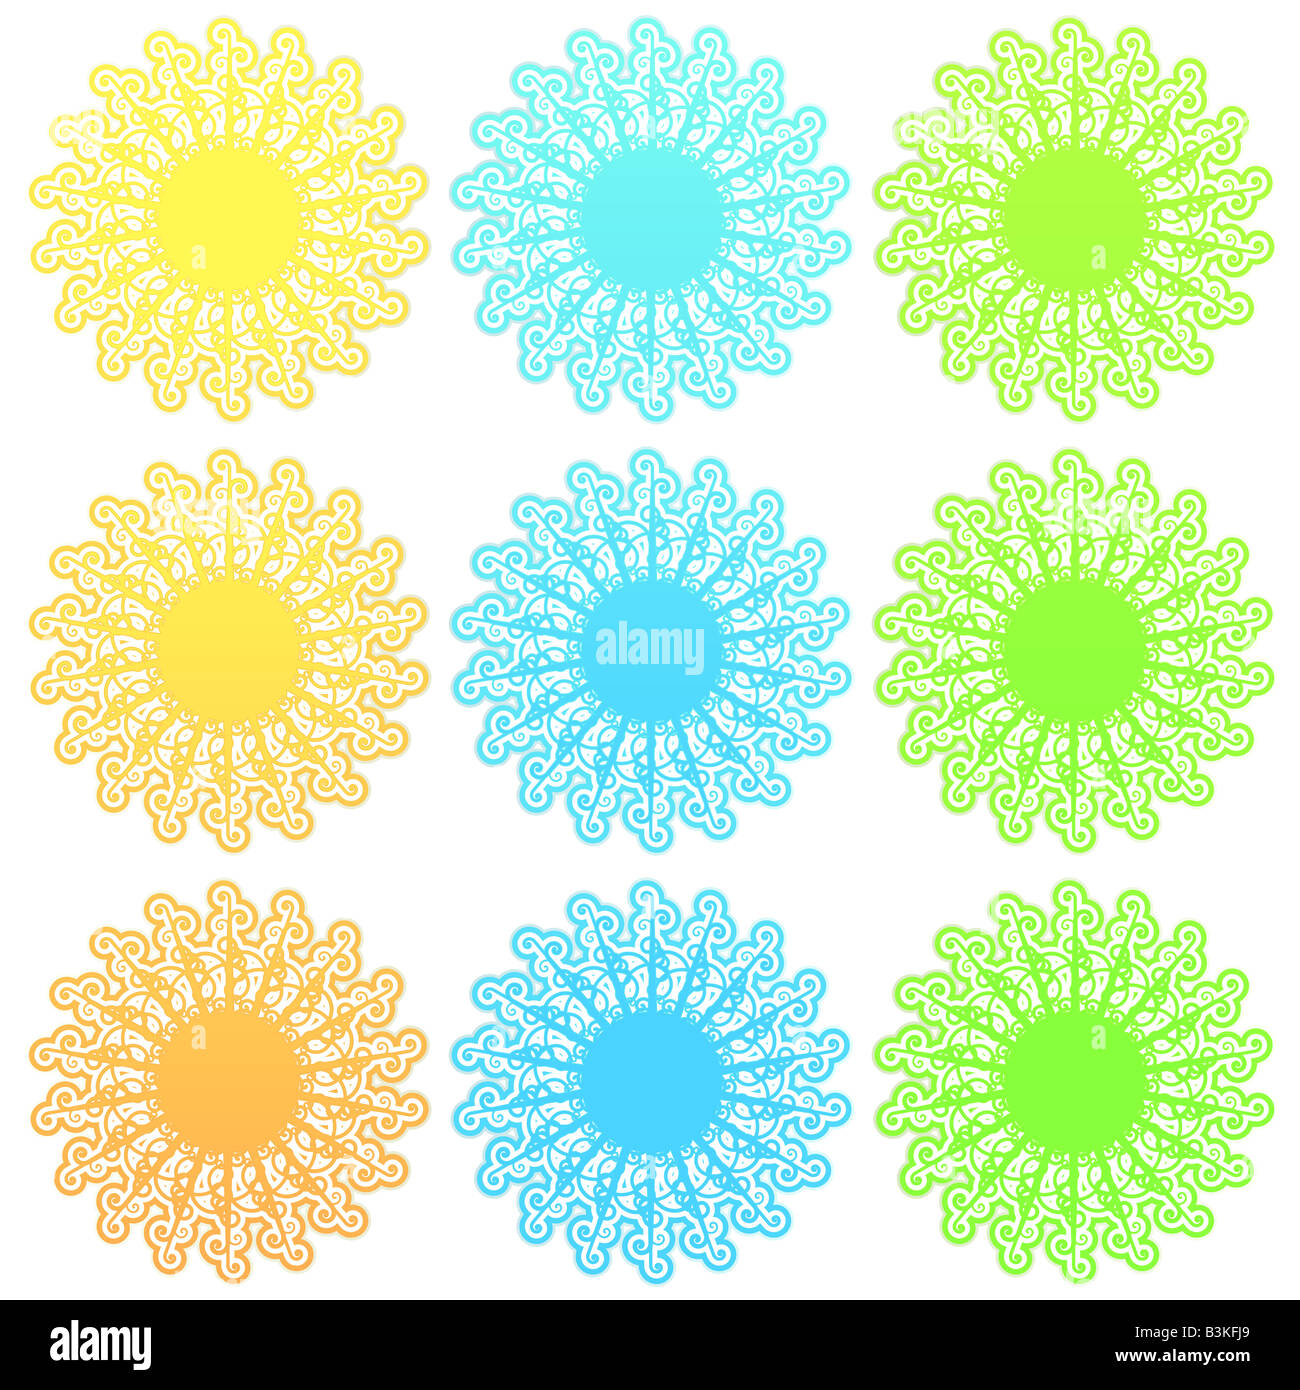 Vector illustration of a stylized retro funky suns with slick gradients Stock Photo